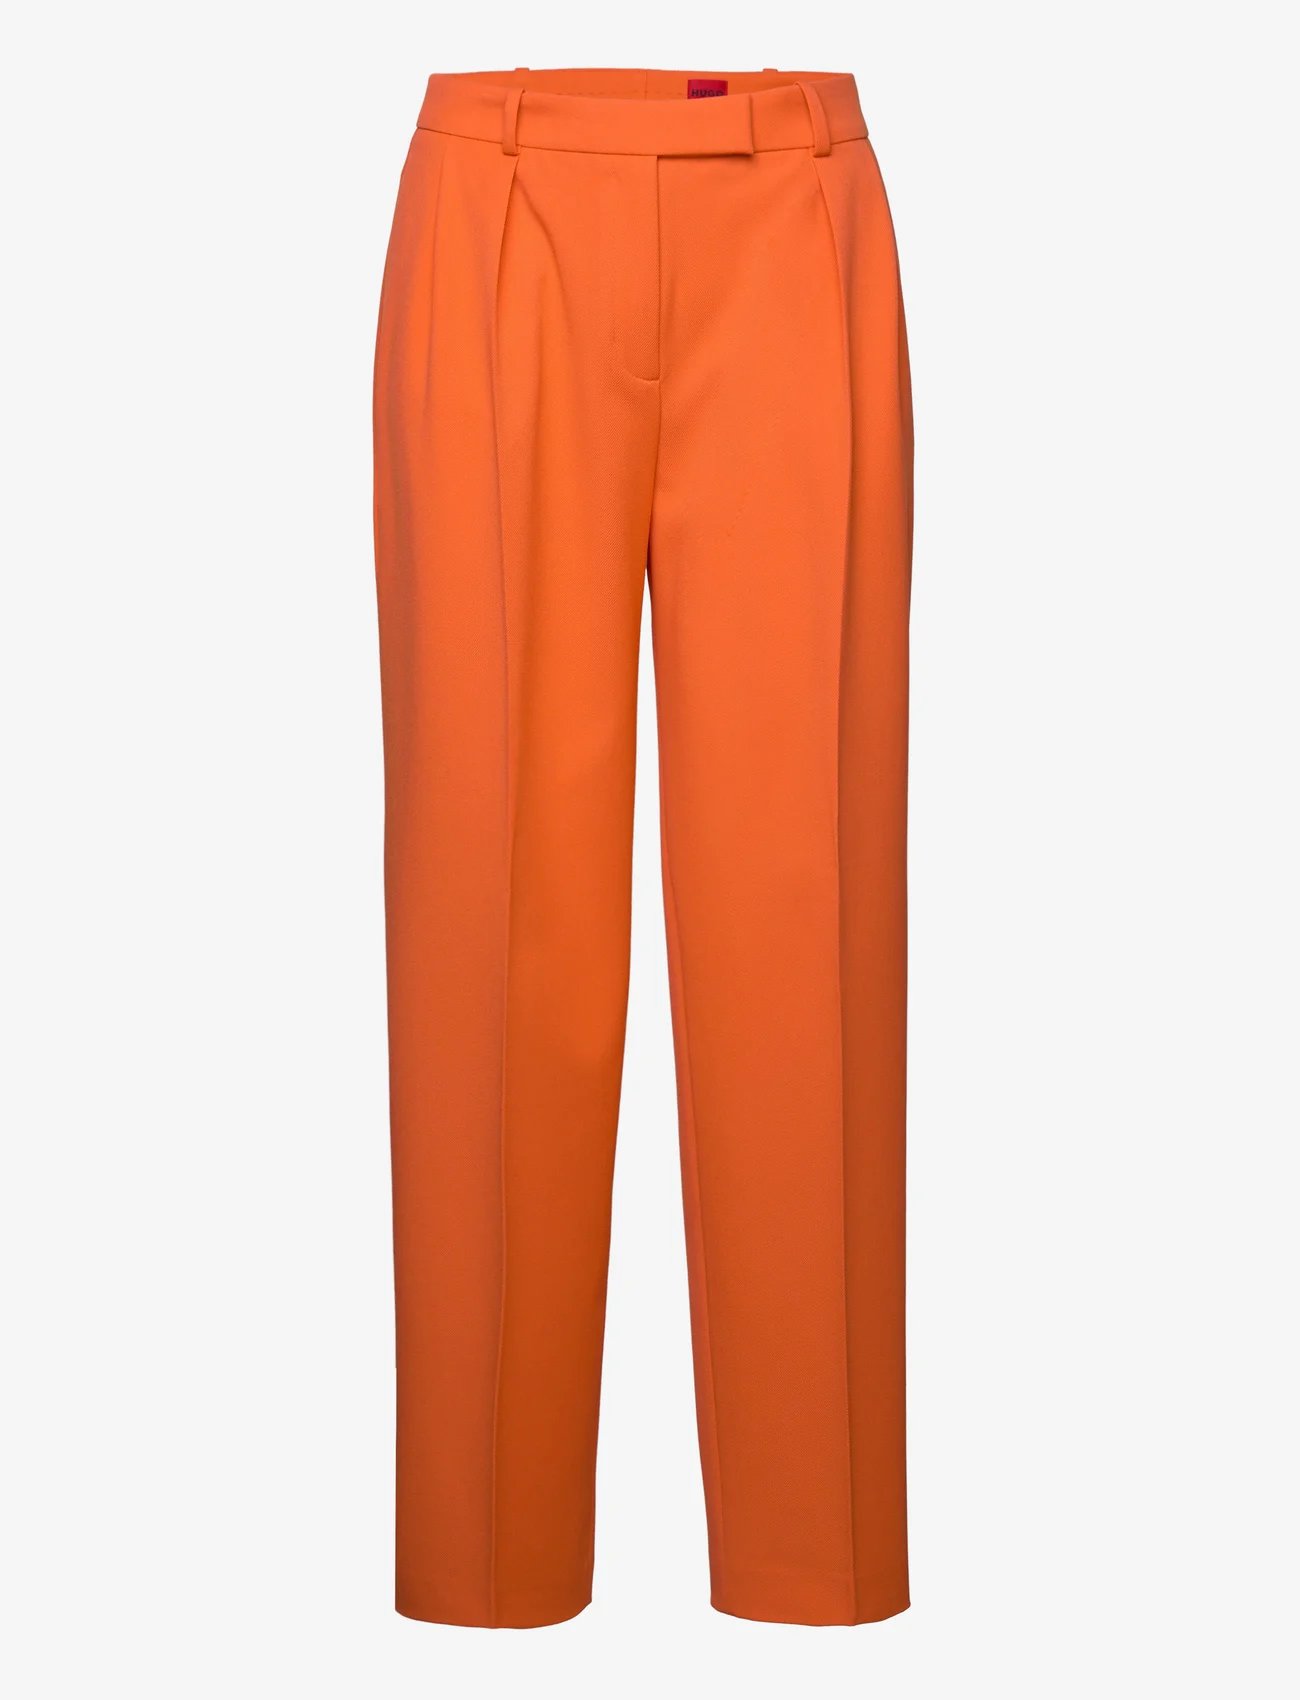 HUGO - Hanifa - tailored trousers - bright red - 0